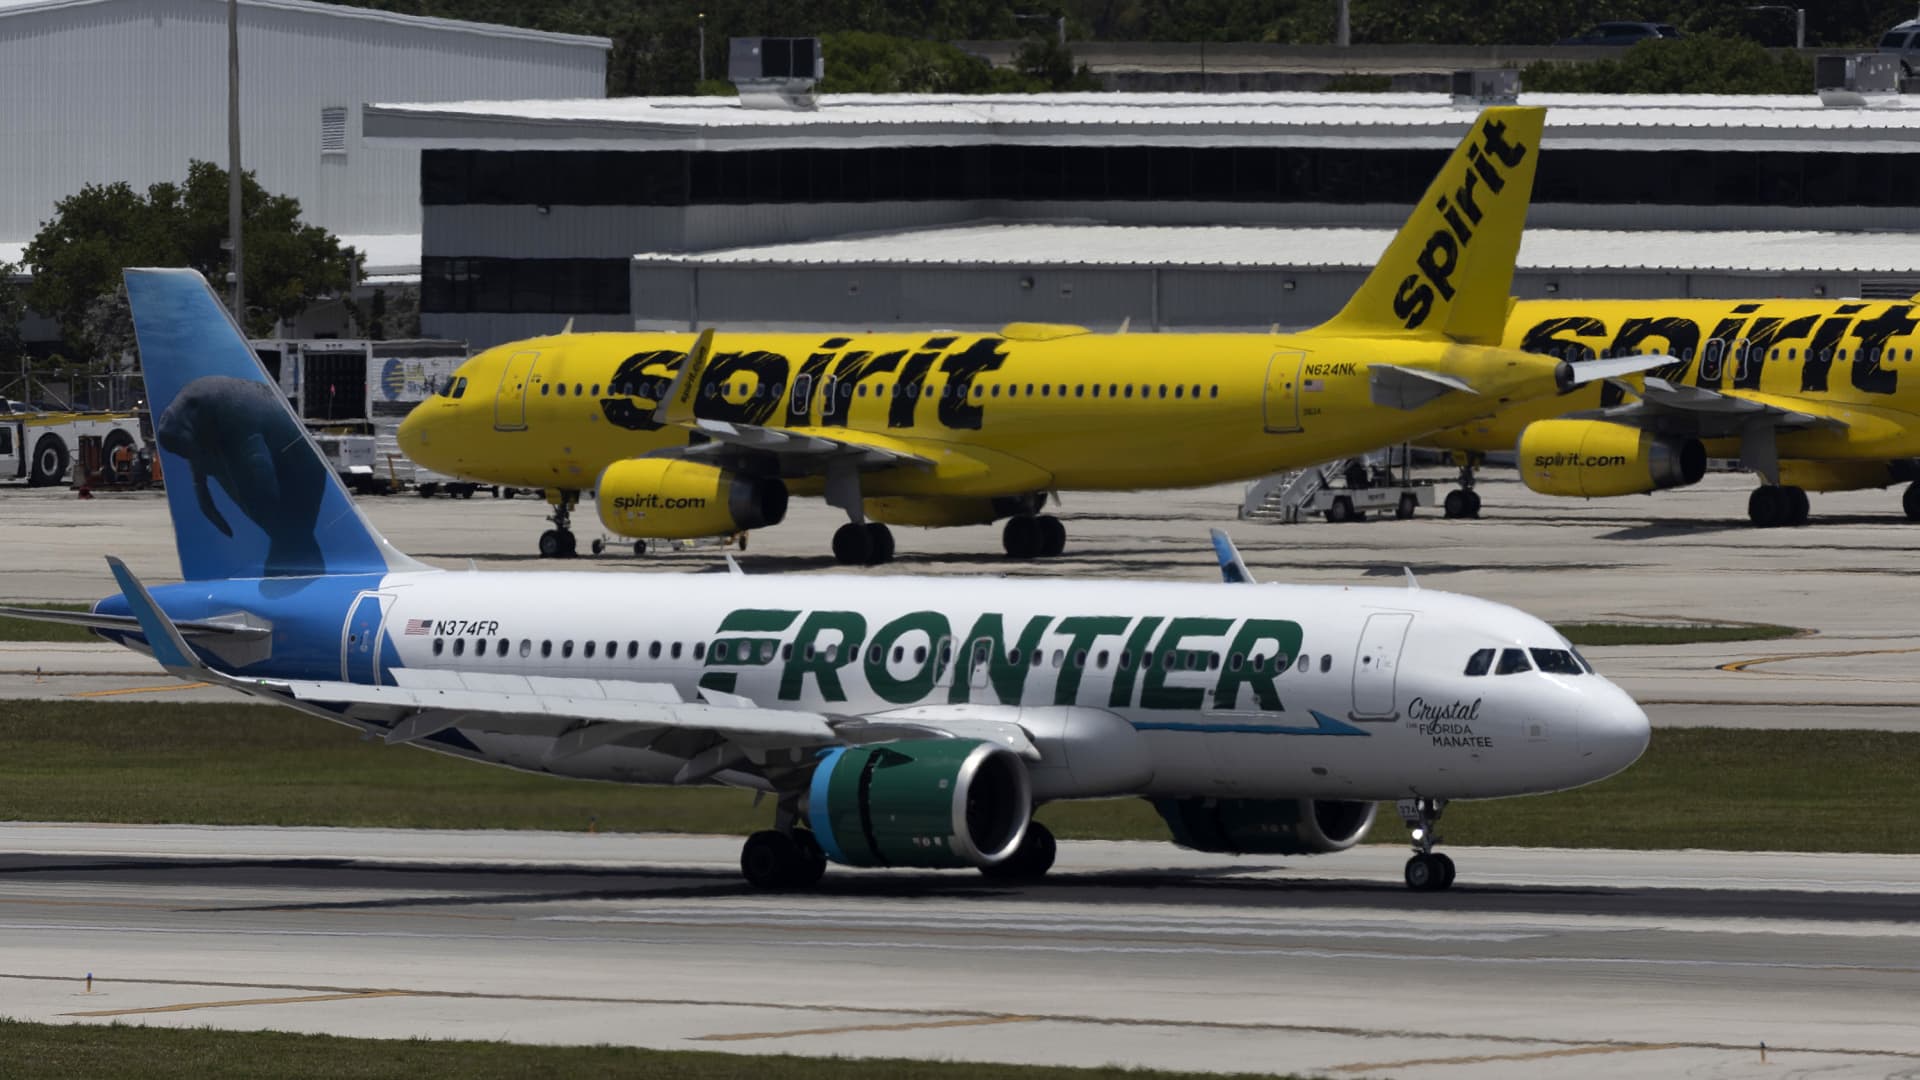 Spirit delays vote on Frontier deal for a third time amid bidding war with JetBlue